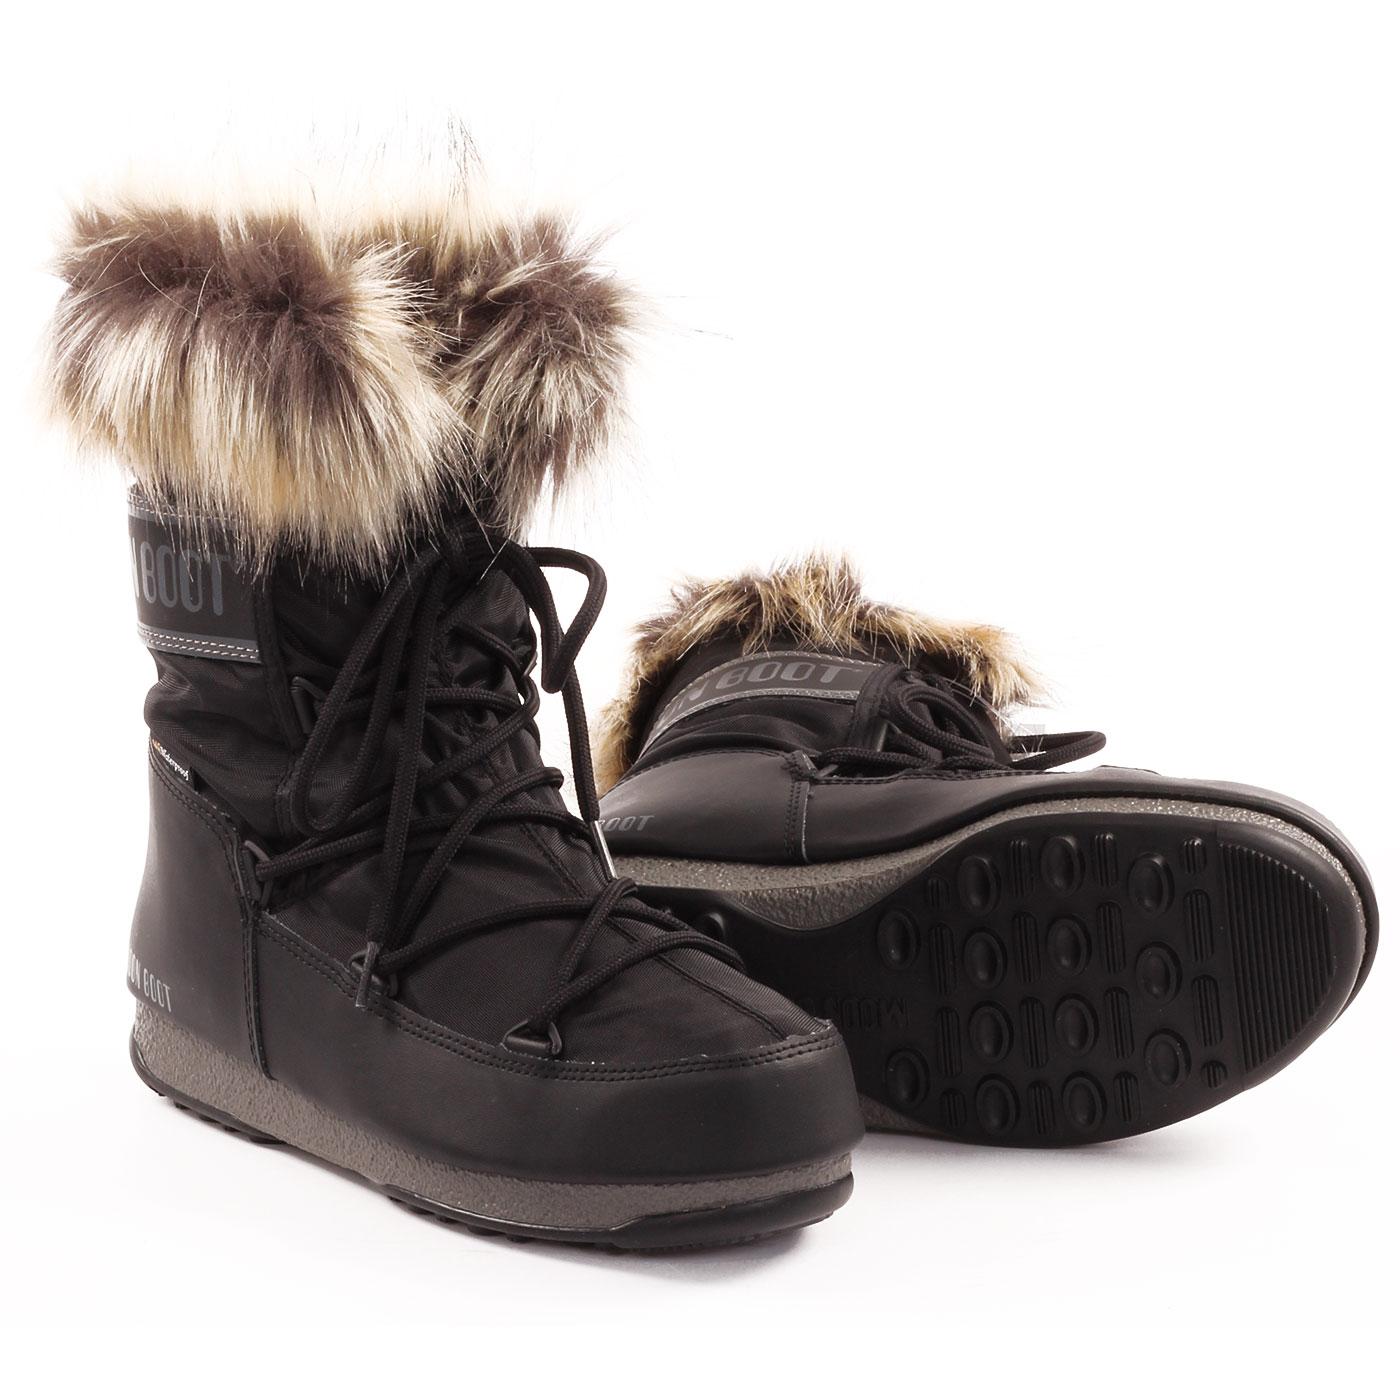 Moon Boots Fur Lined Snow Boots Limited Stock Winter Shoes Bargain Sizes 37-41